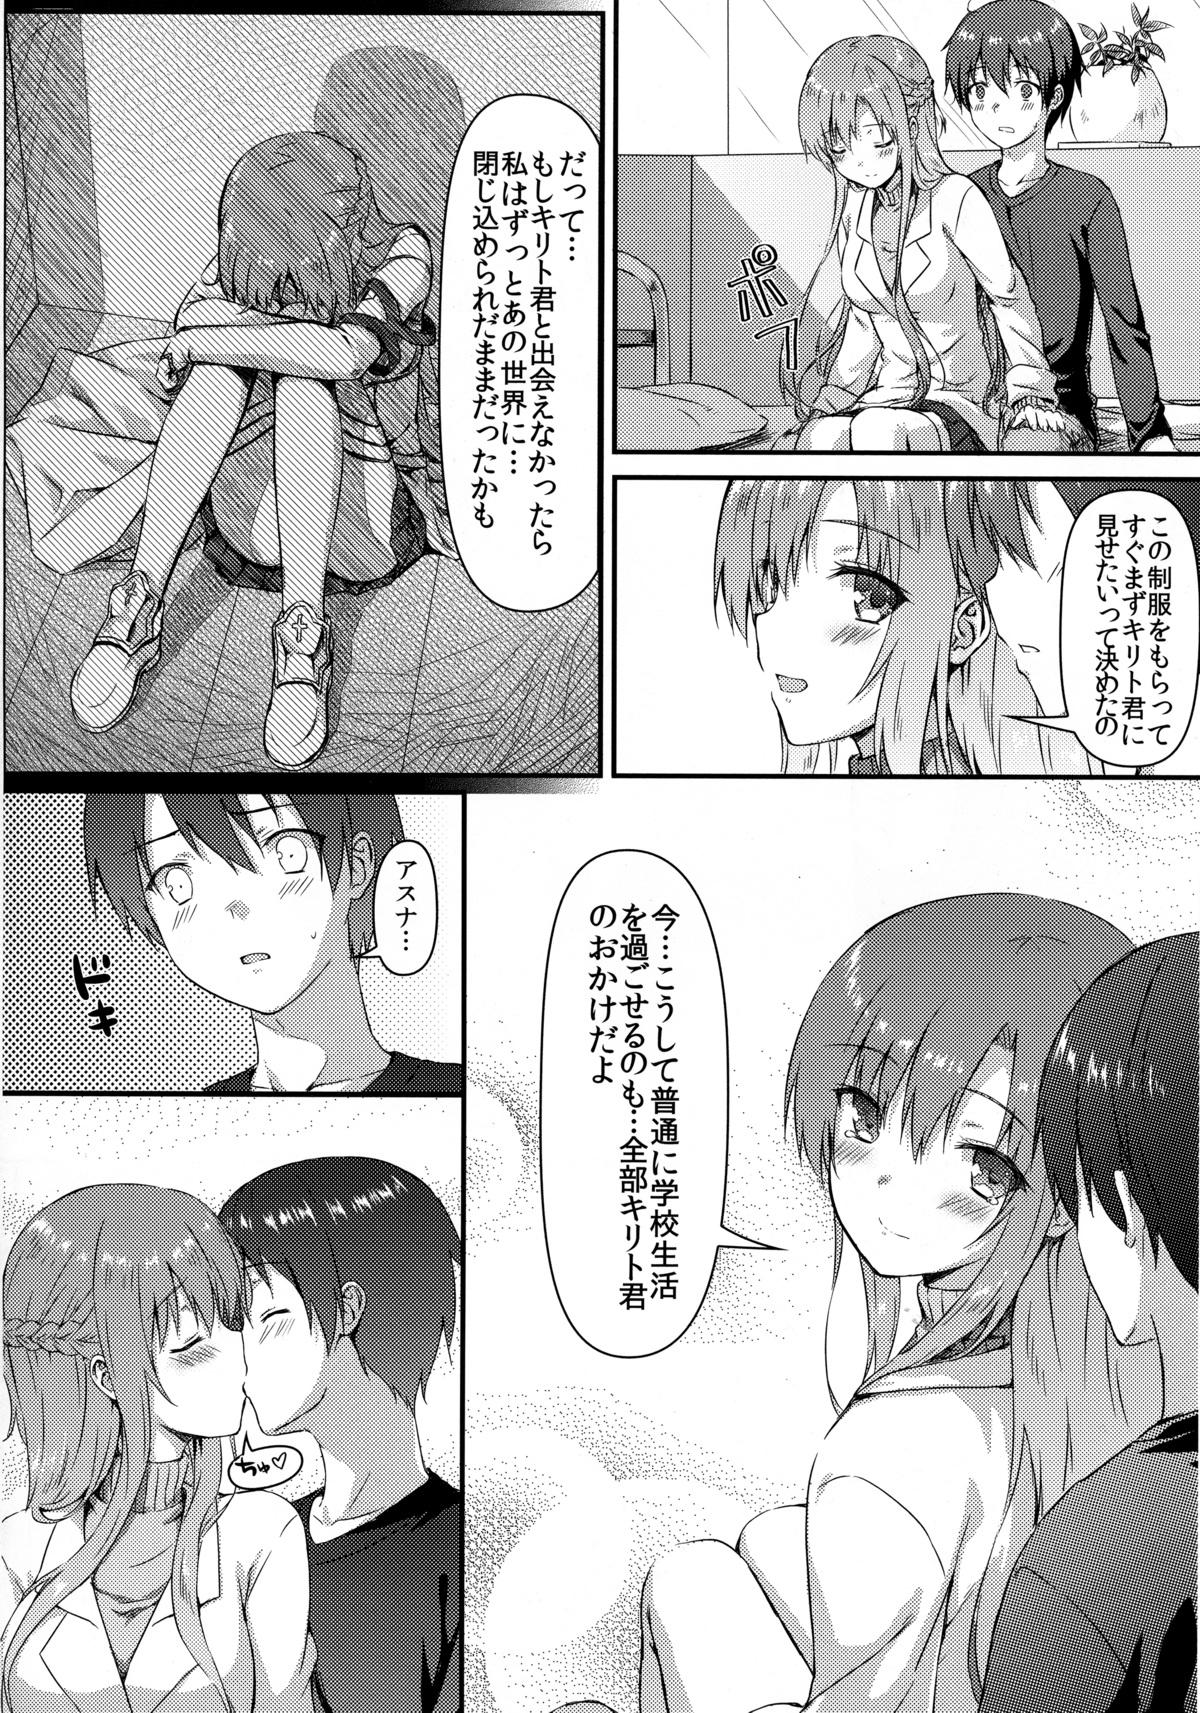 Orgy Motto Sugoku Amai Onegai - Sword art online Eating Pussy - Page 5